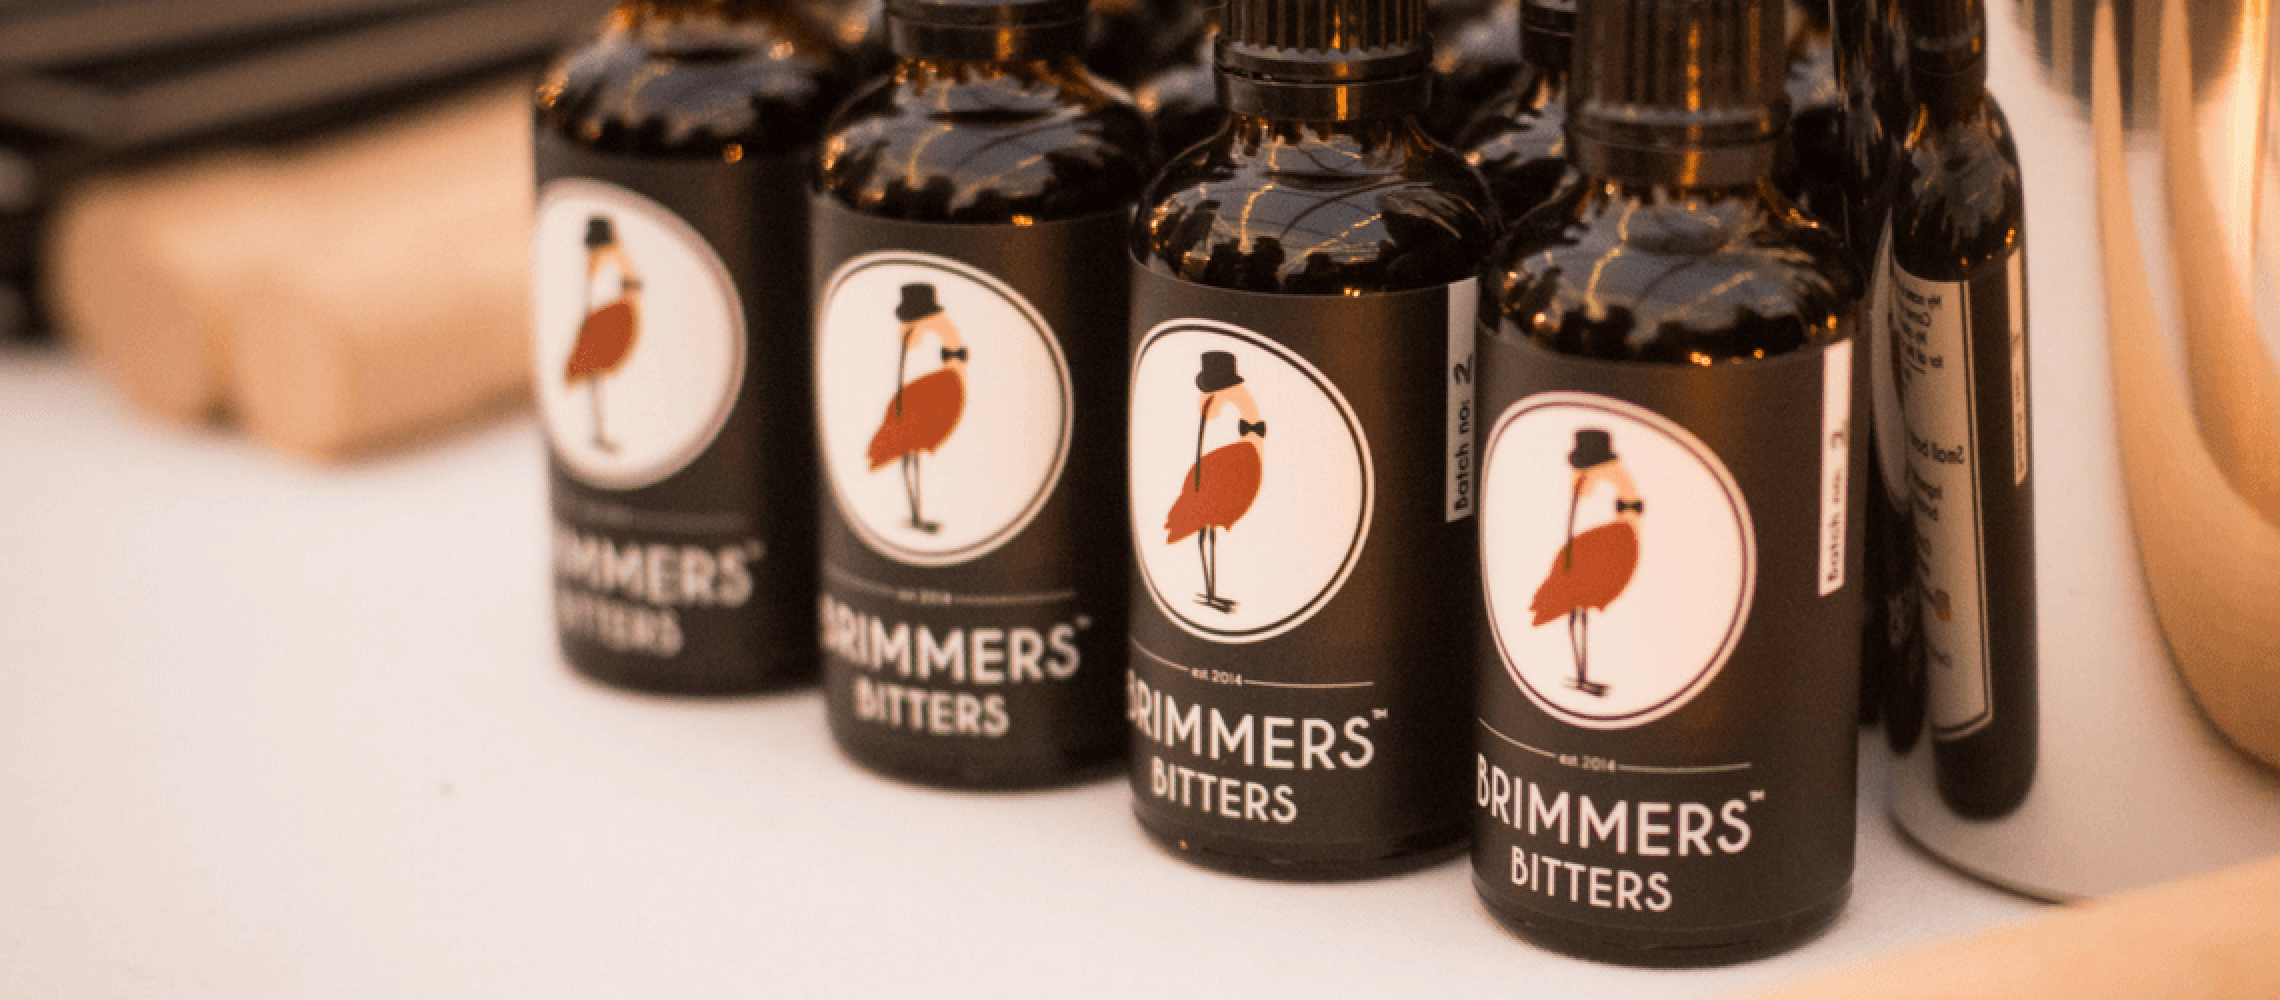 Photo for: The Leading Aromatic Bitters Joins The LSC Race